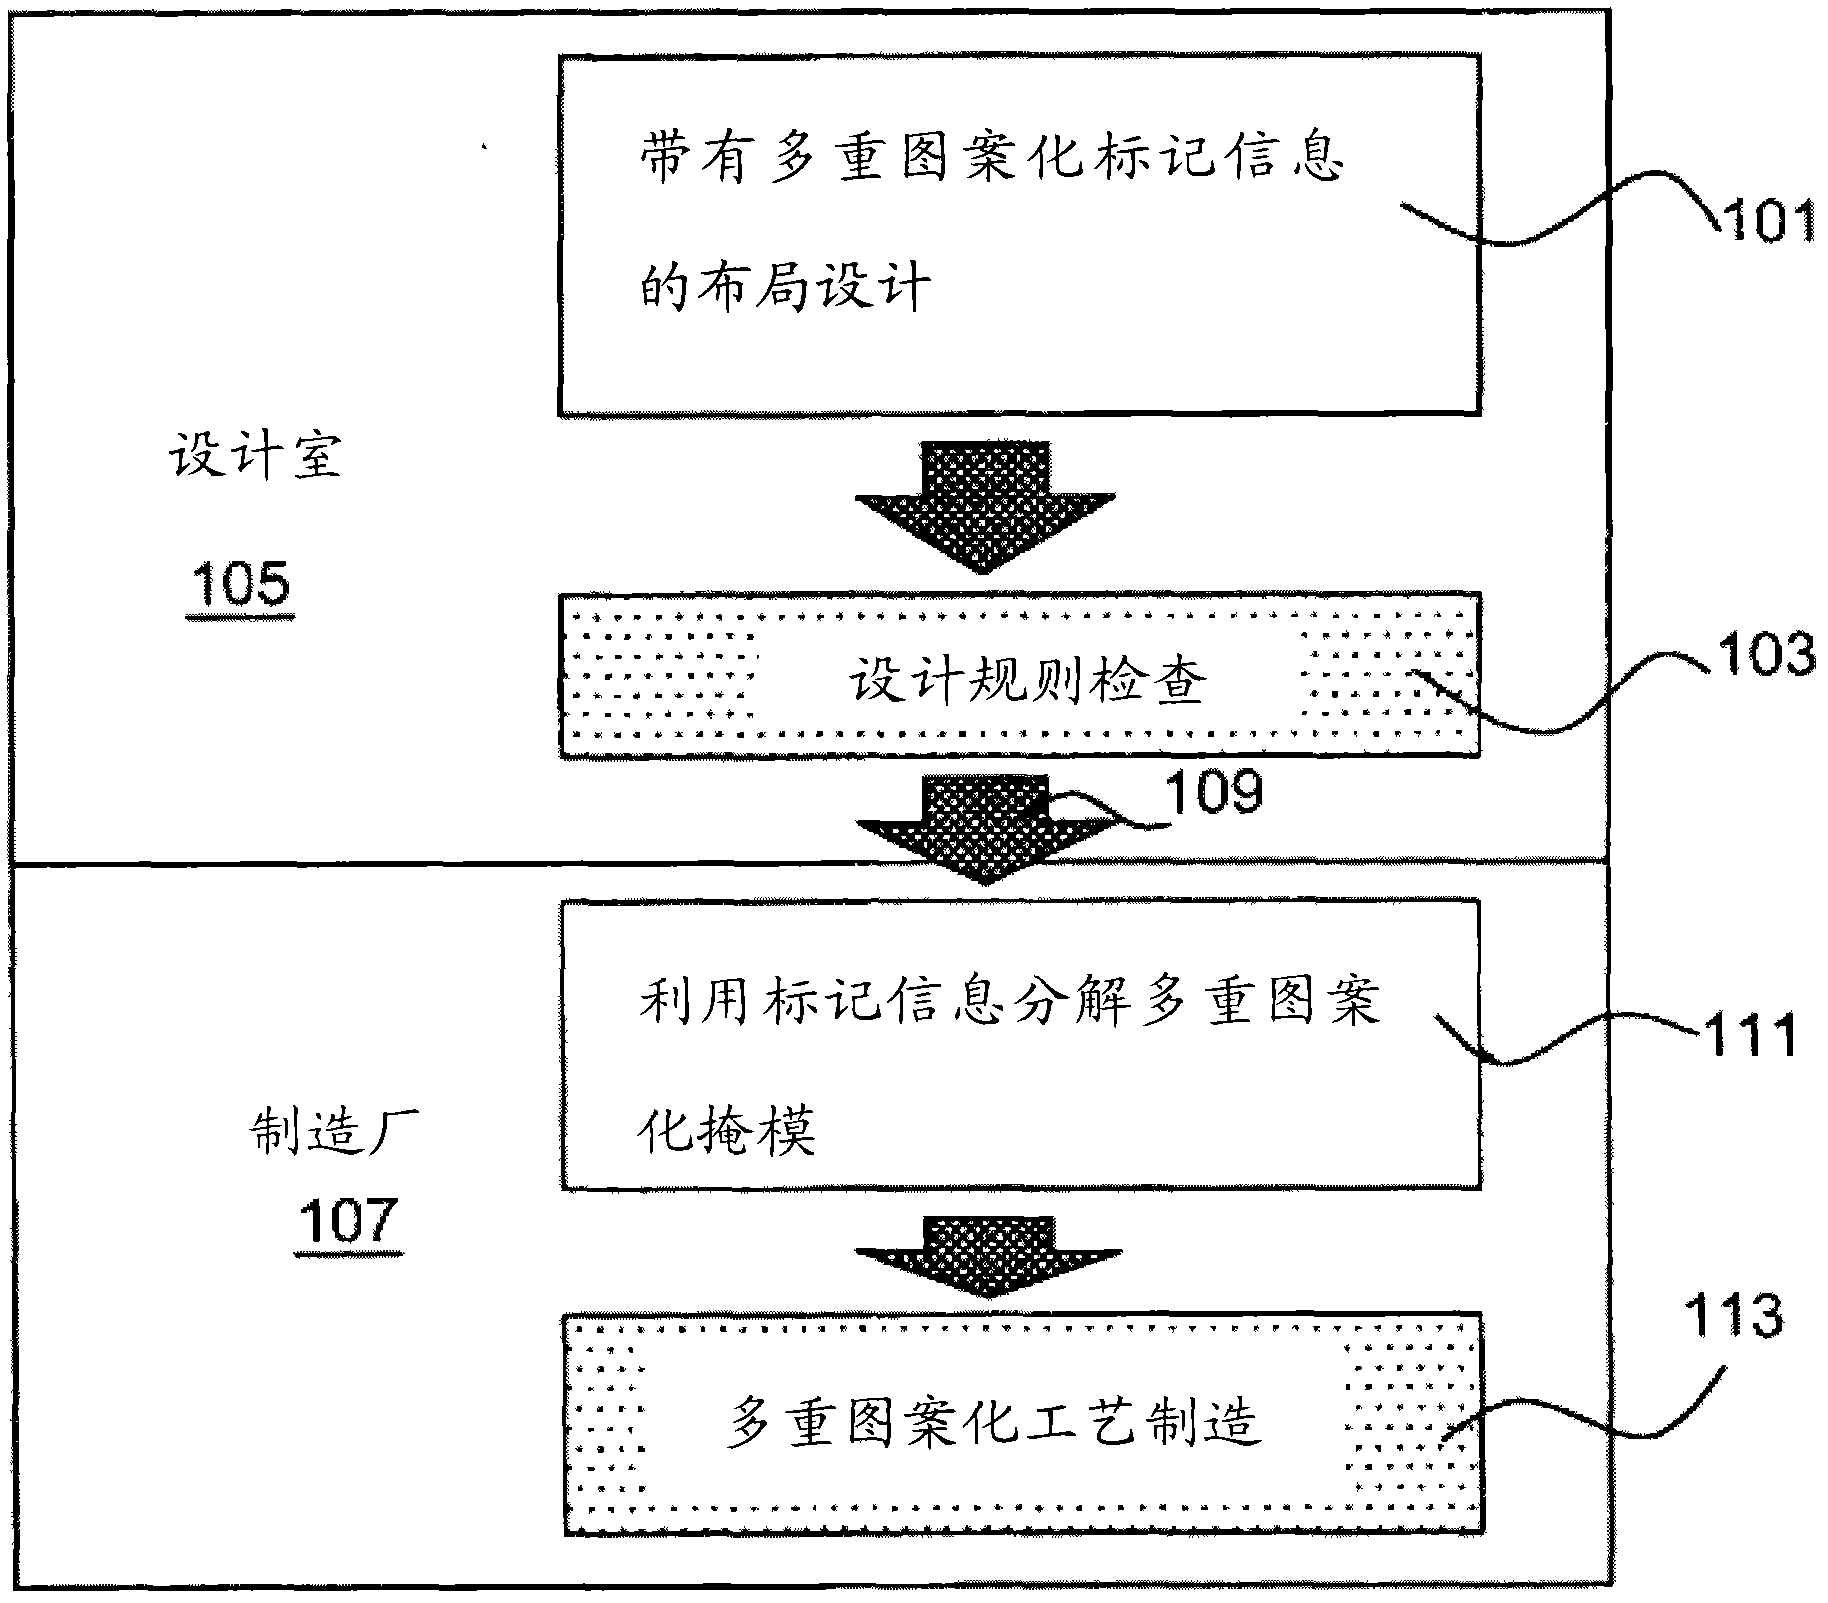 Decomposition and marking of semiconductor device design layout in double patterning lithography